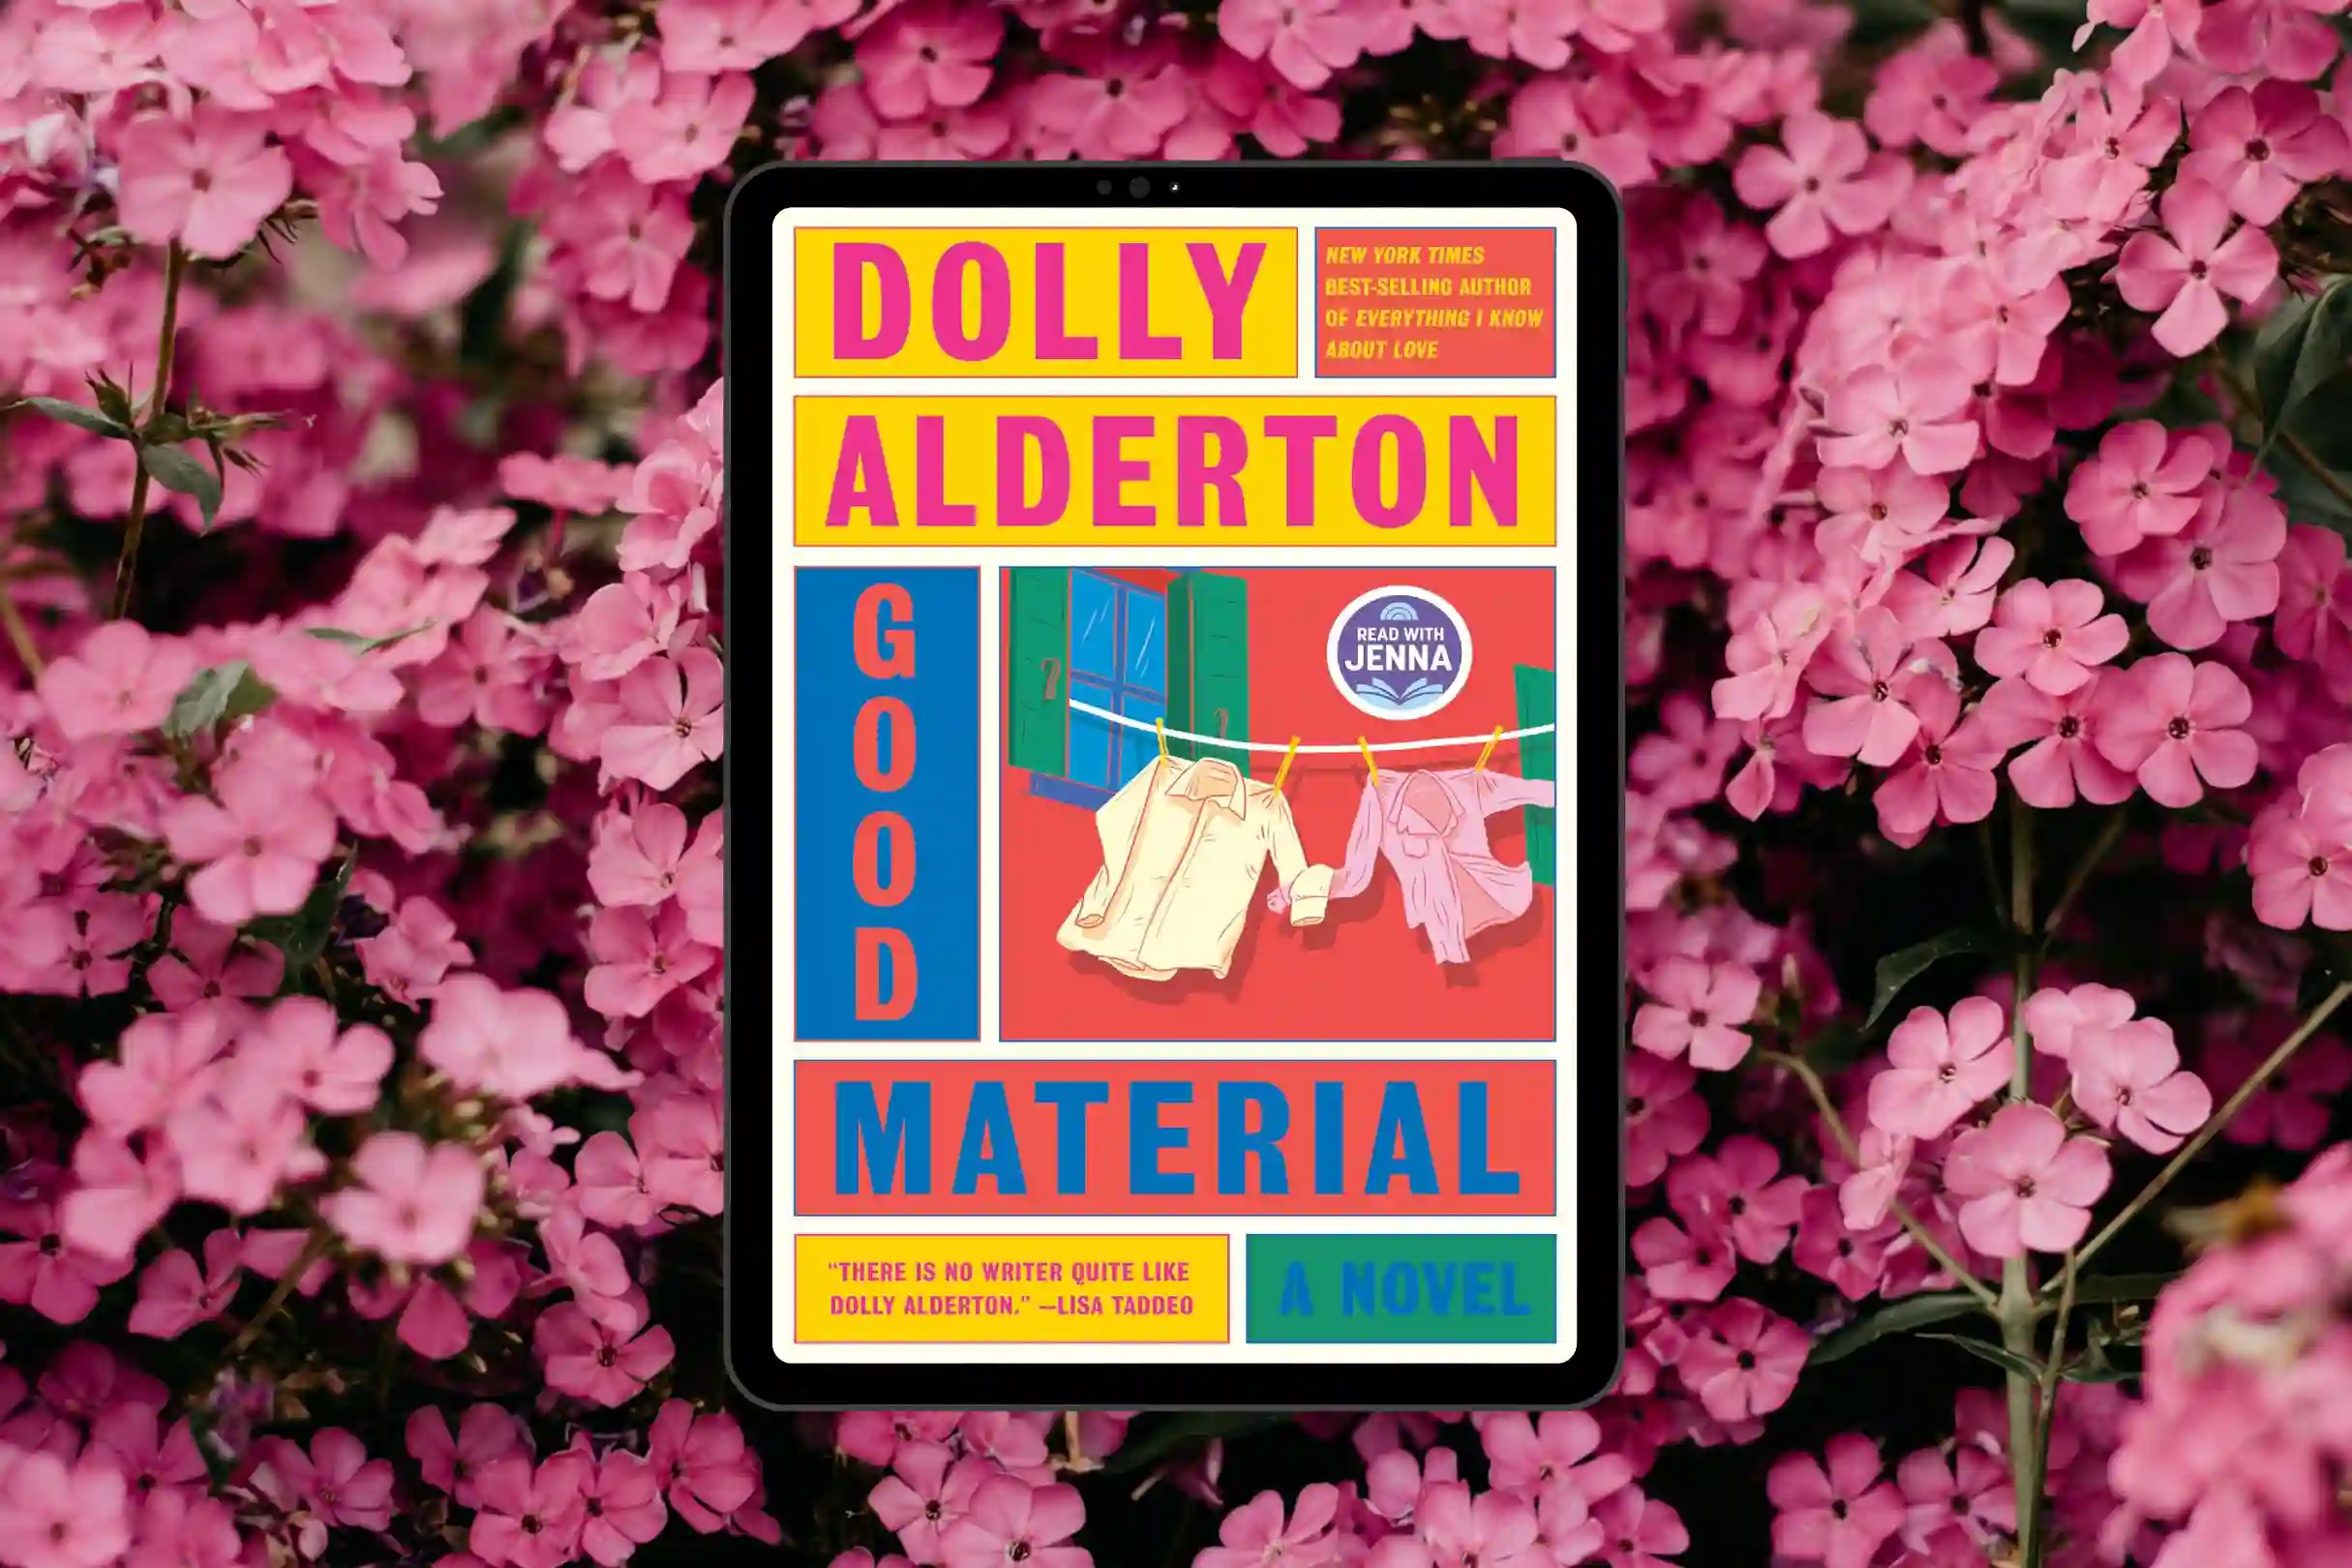 book_club_questions_for_good_material_by_dolly_alderton